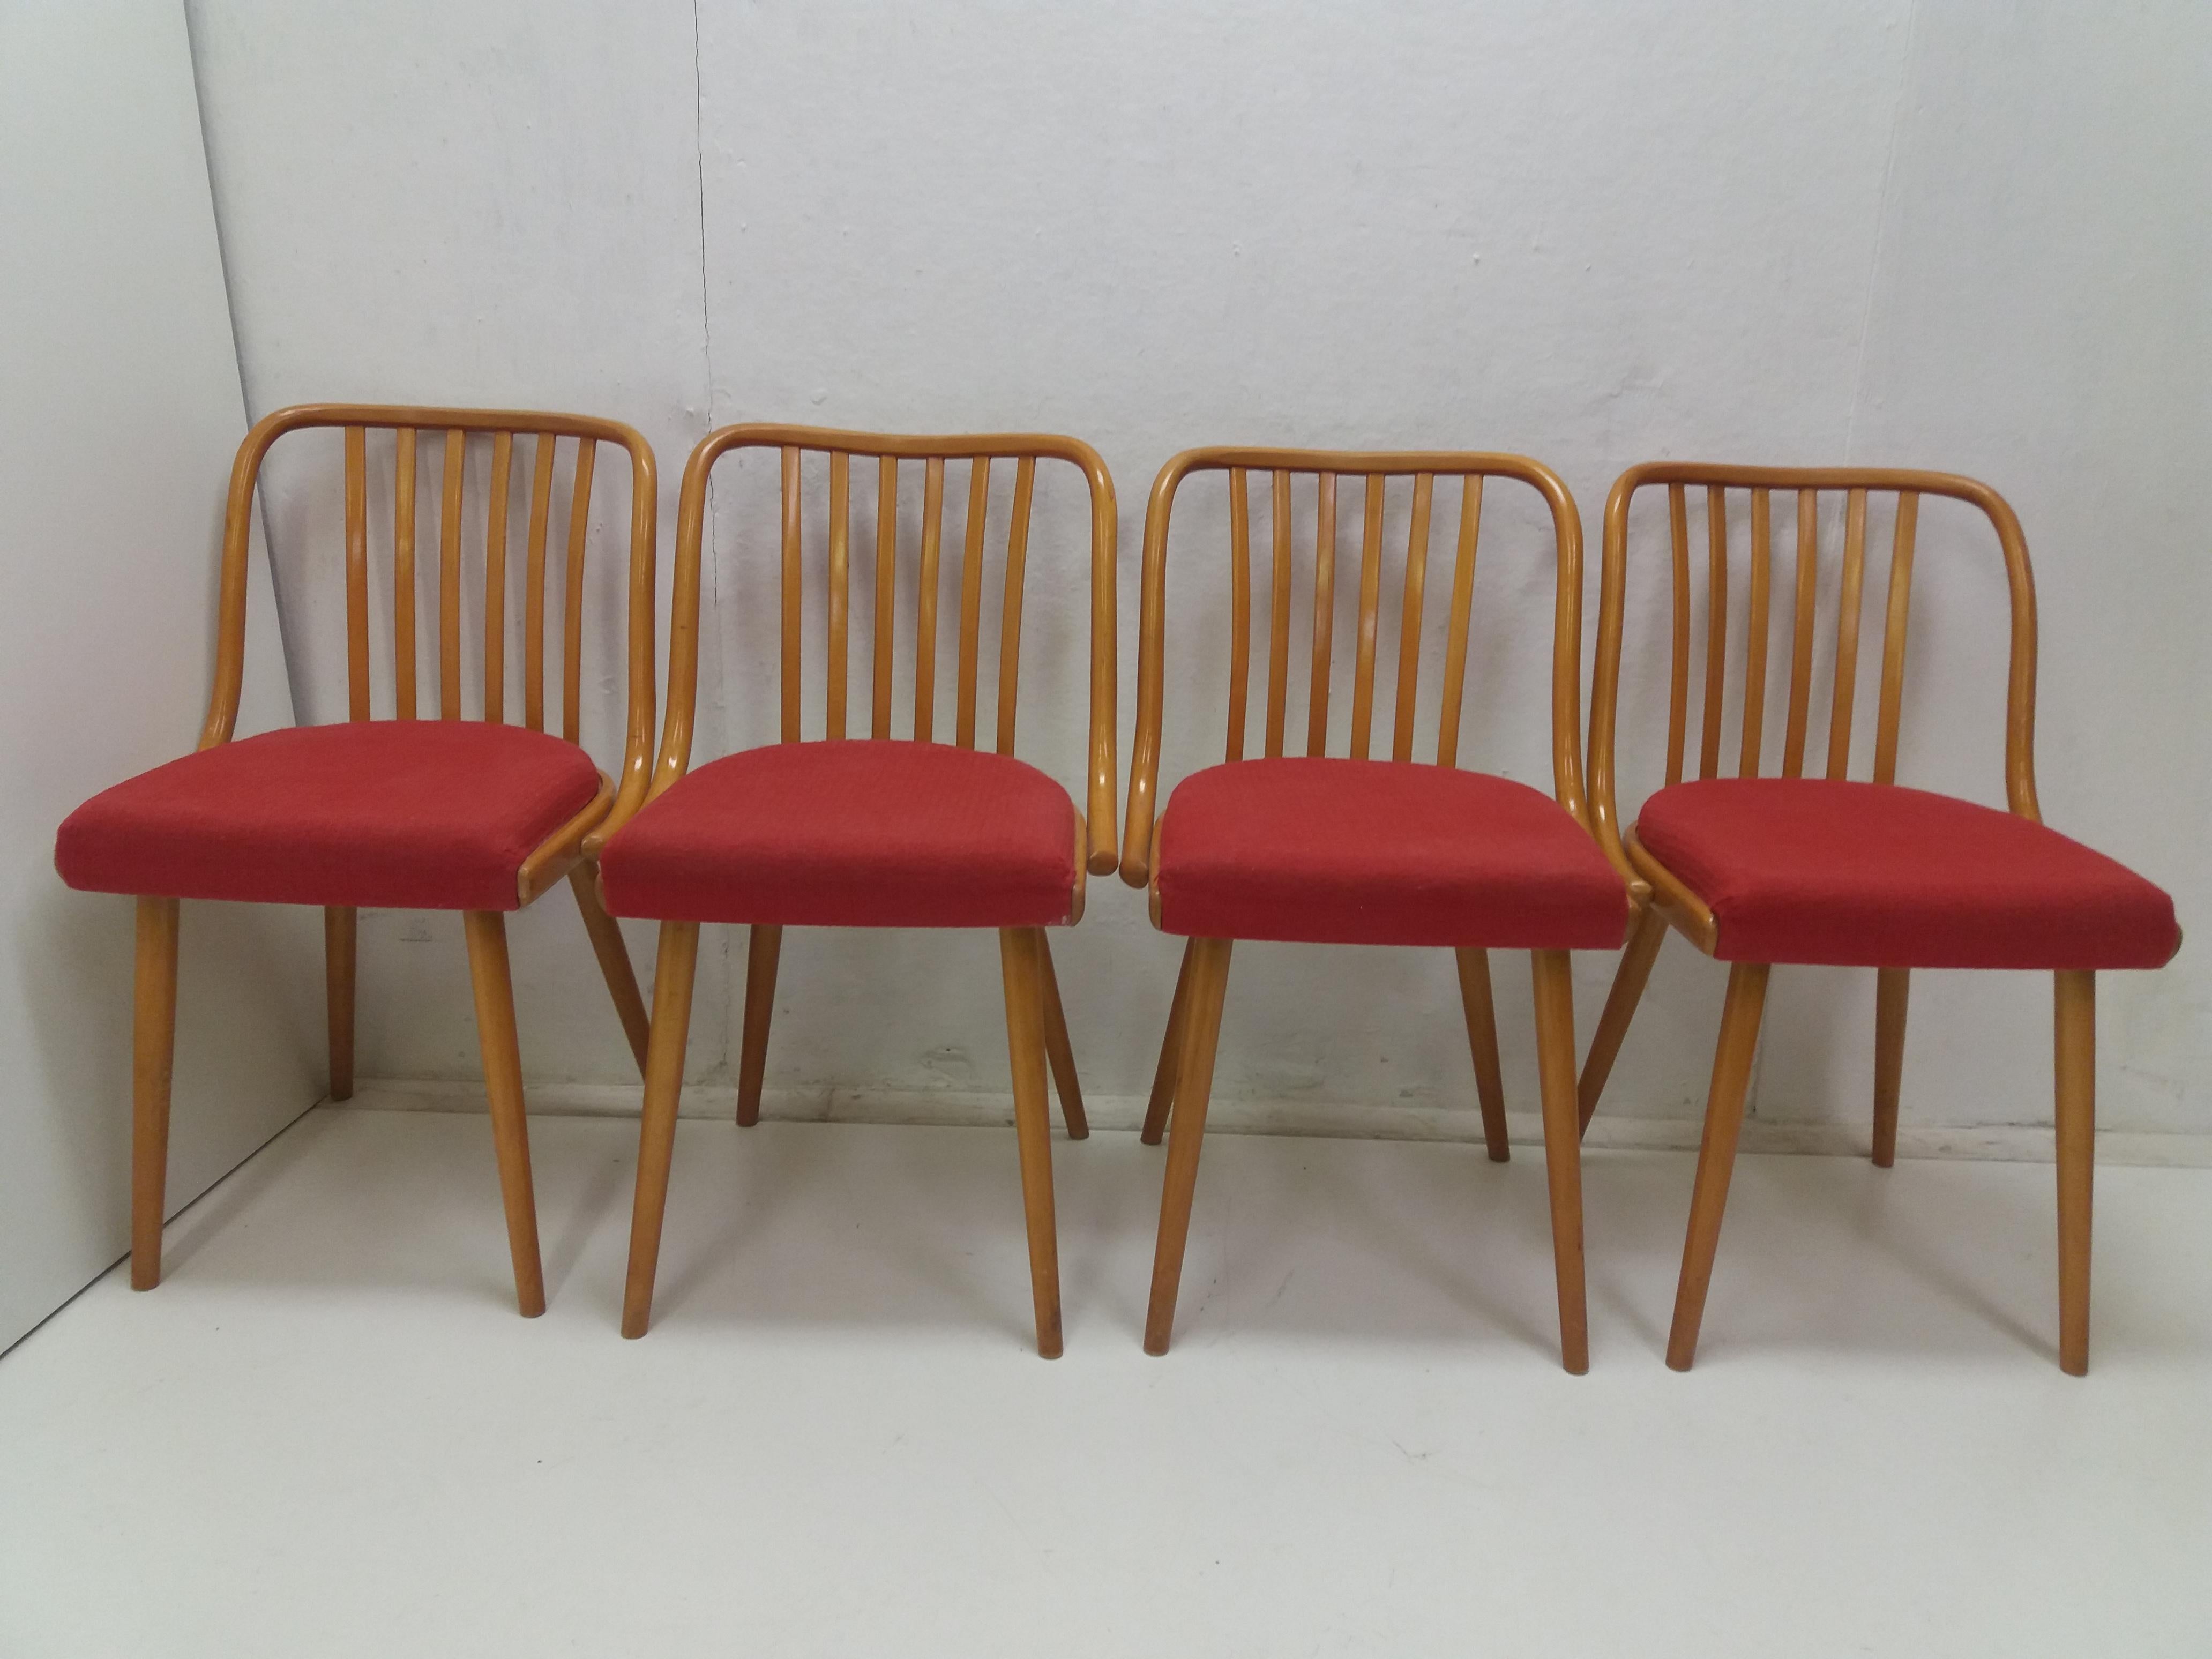 1960 Set of 4 Retro Suman Chairs and Table, Czechoslovakia For Sale 4